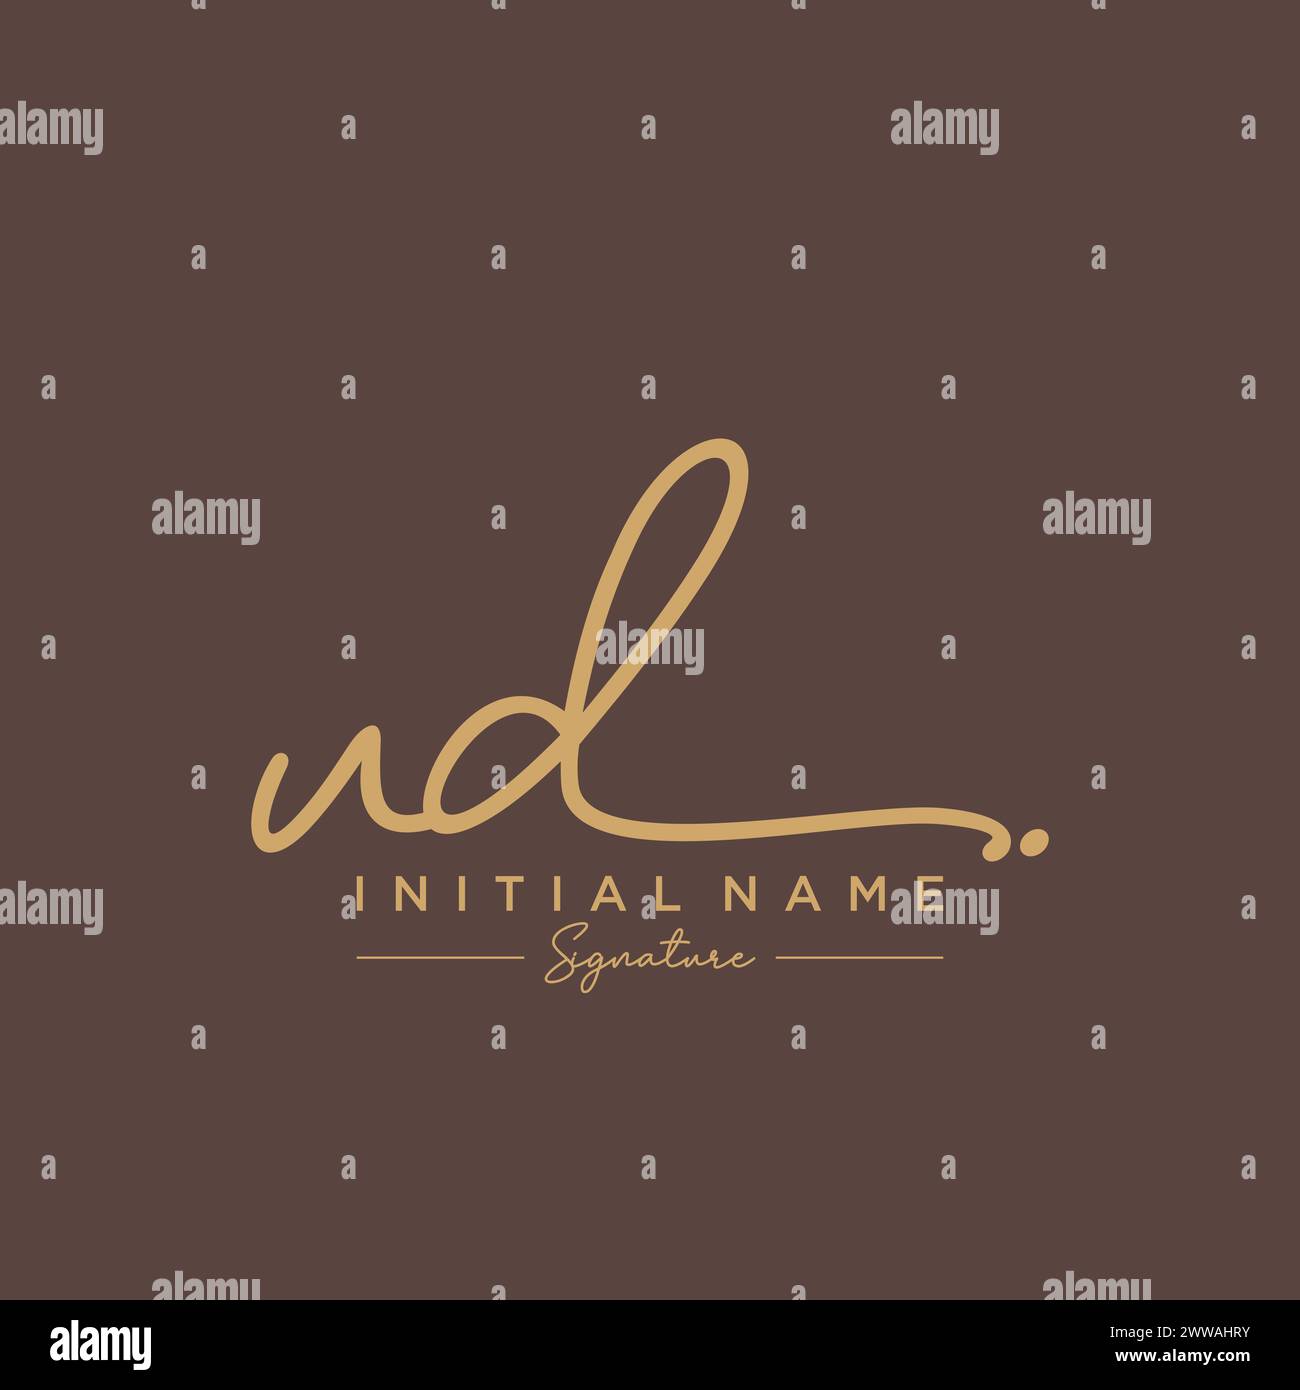 UD Signature Logo Template Vector Stock Vector